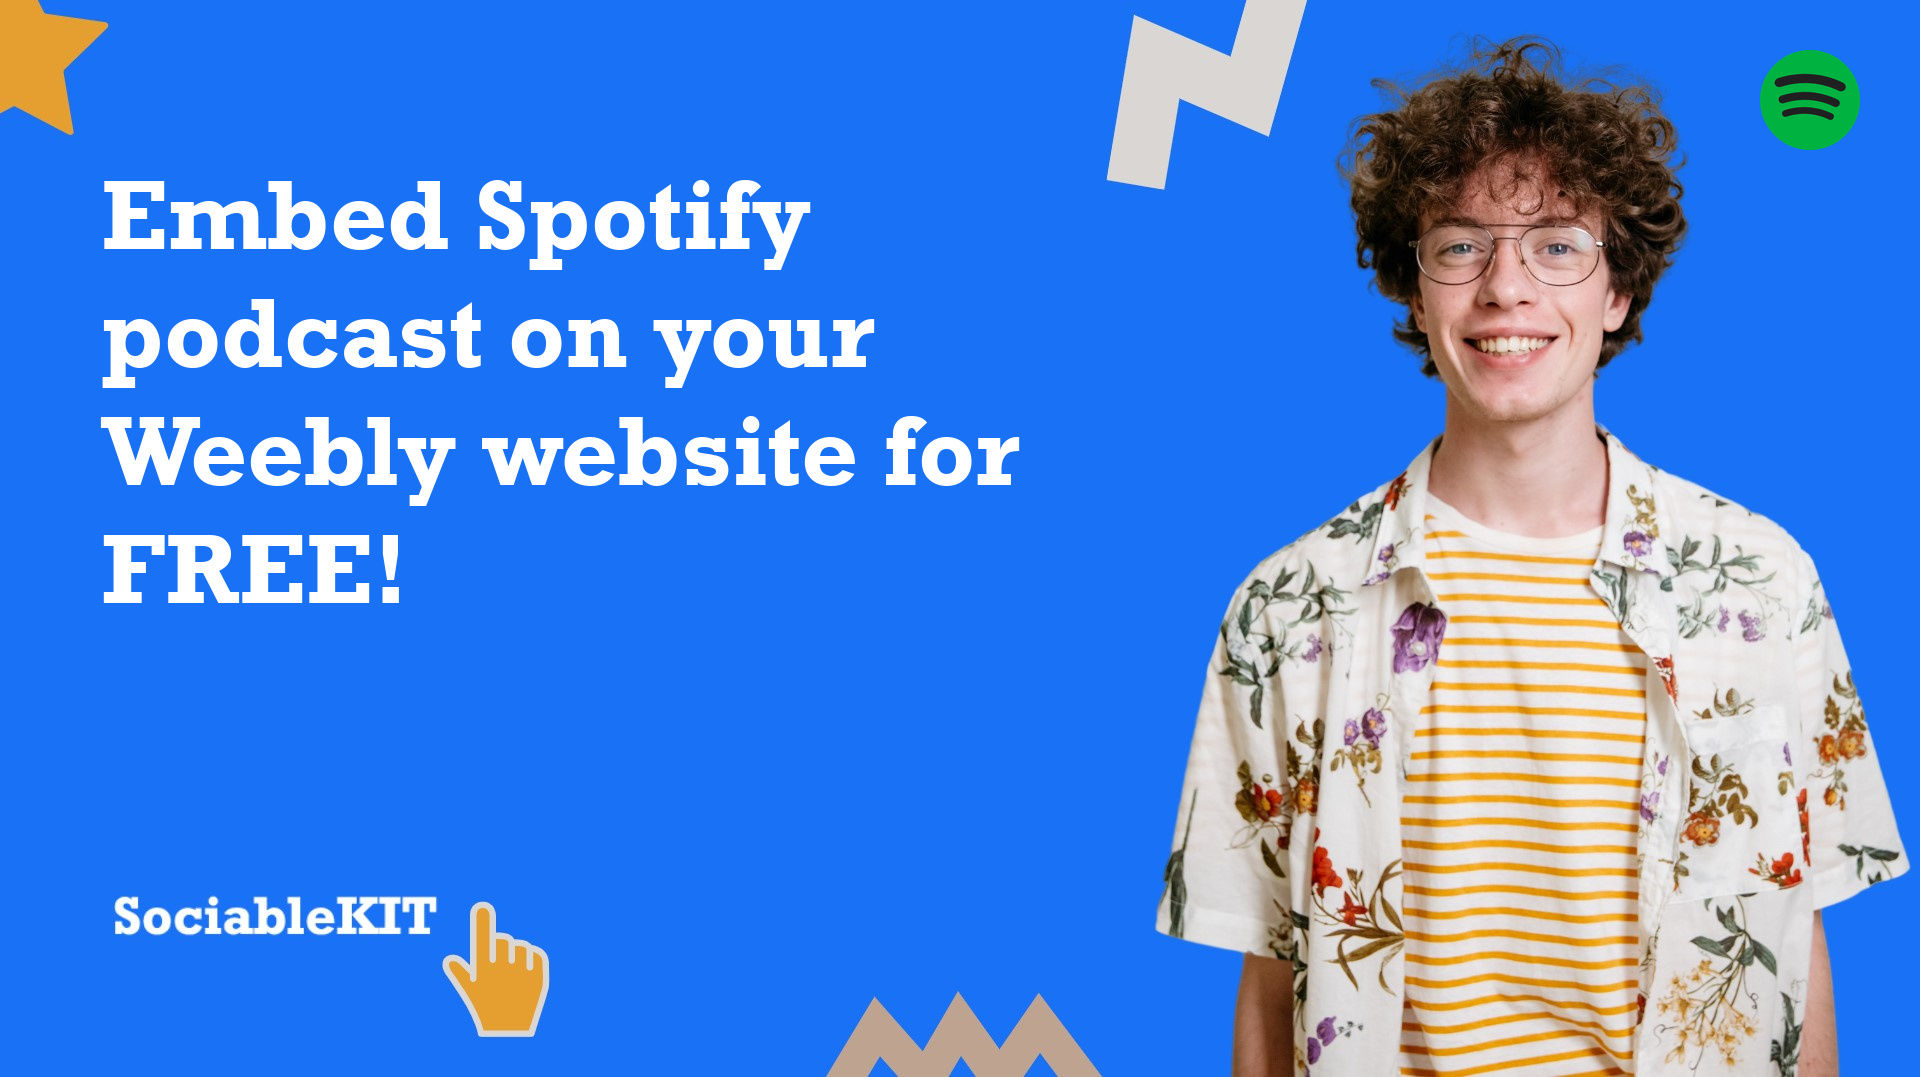 How to embed Spotify podcast on your Weebly website for FREE?